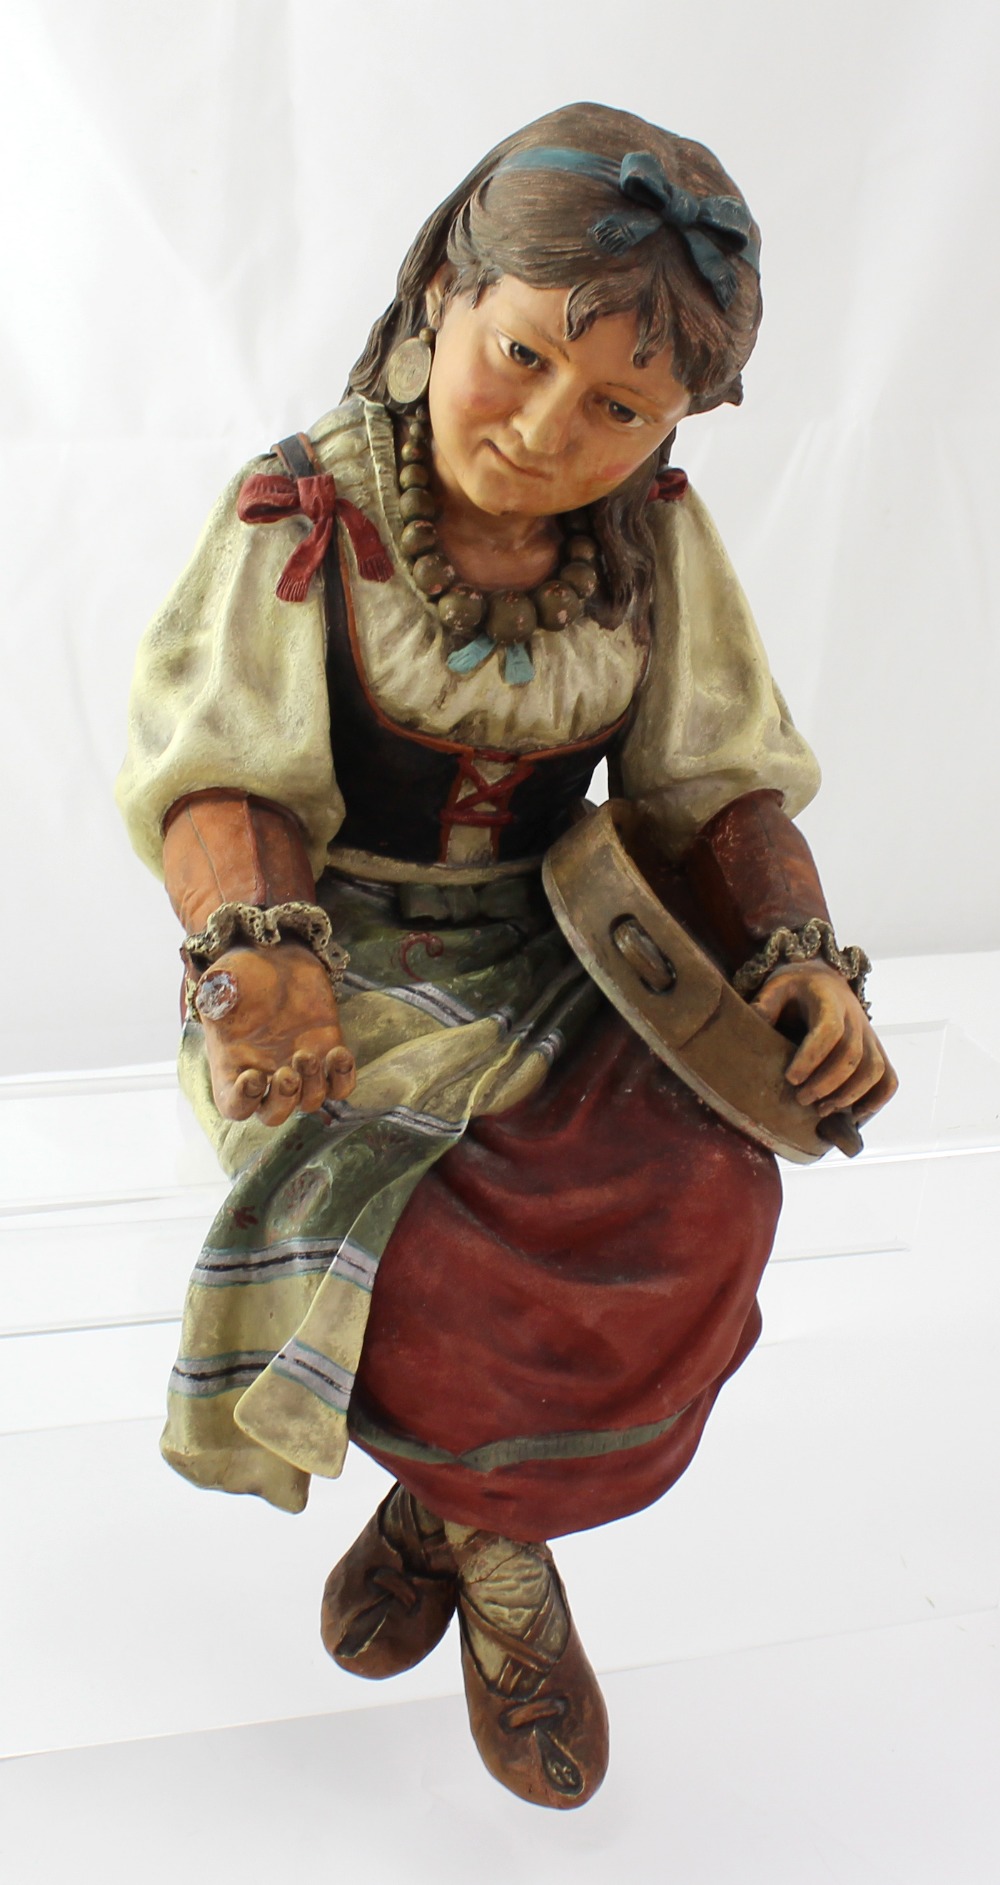 A 19th century Bretby 'Gypsy Girl' figure with a blue bow in her hair, - Image 2 of 2